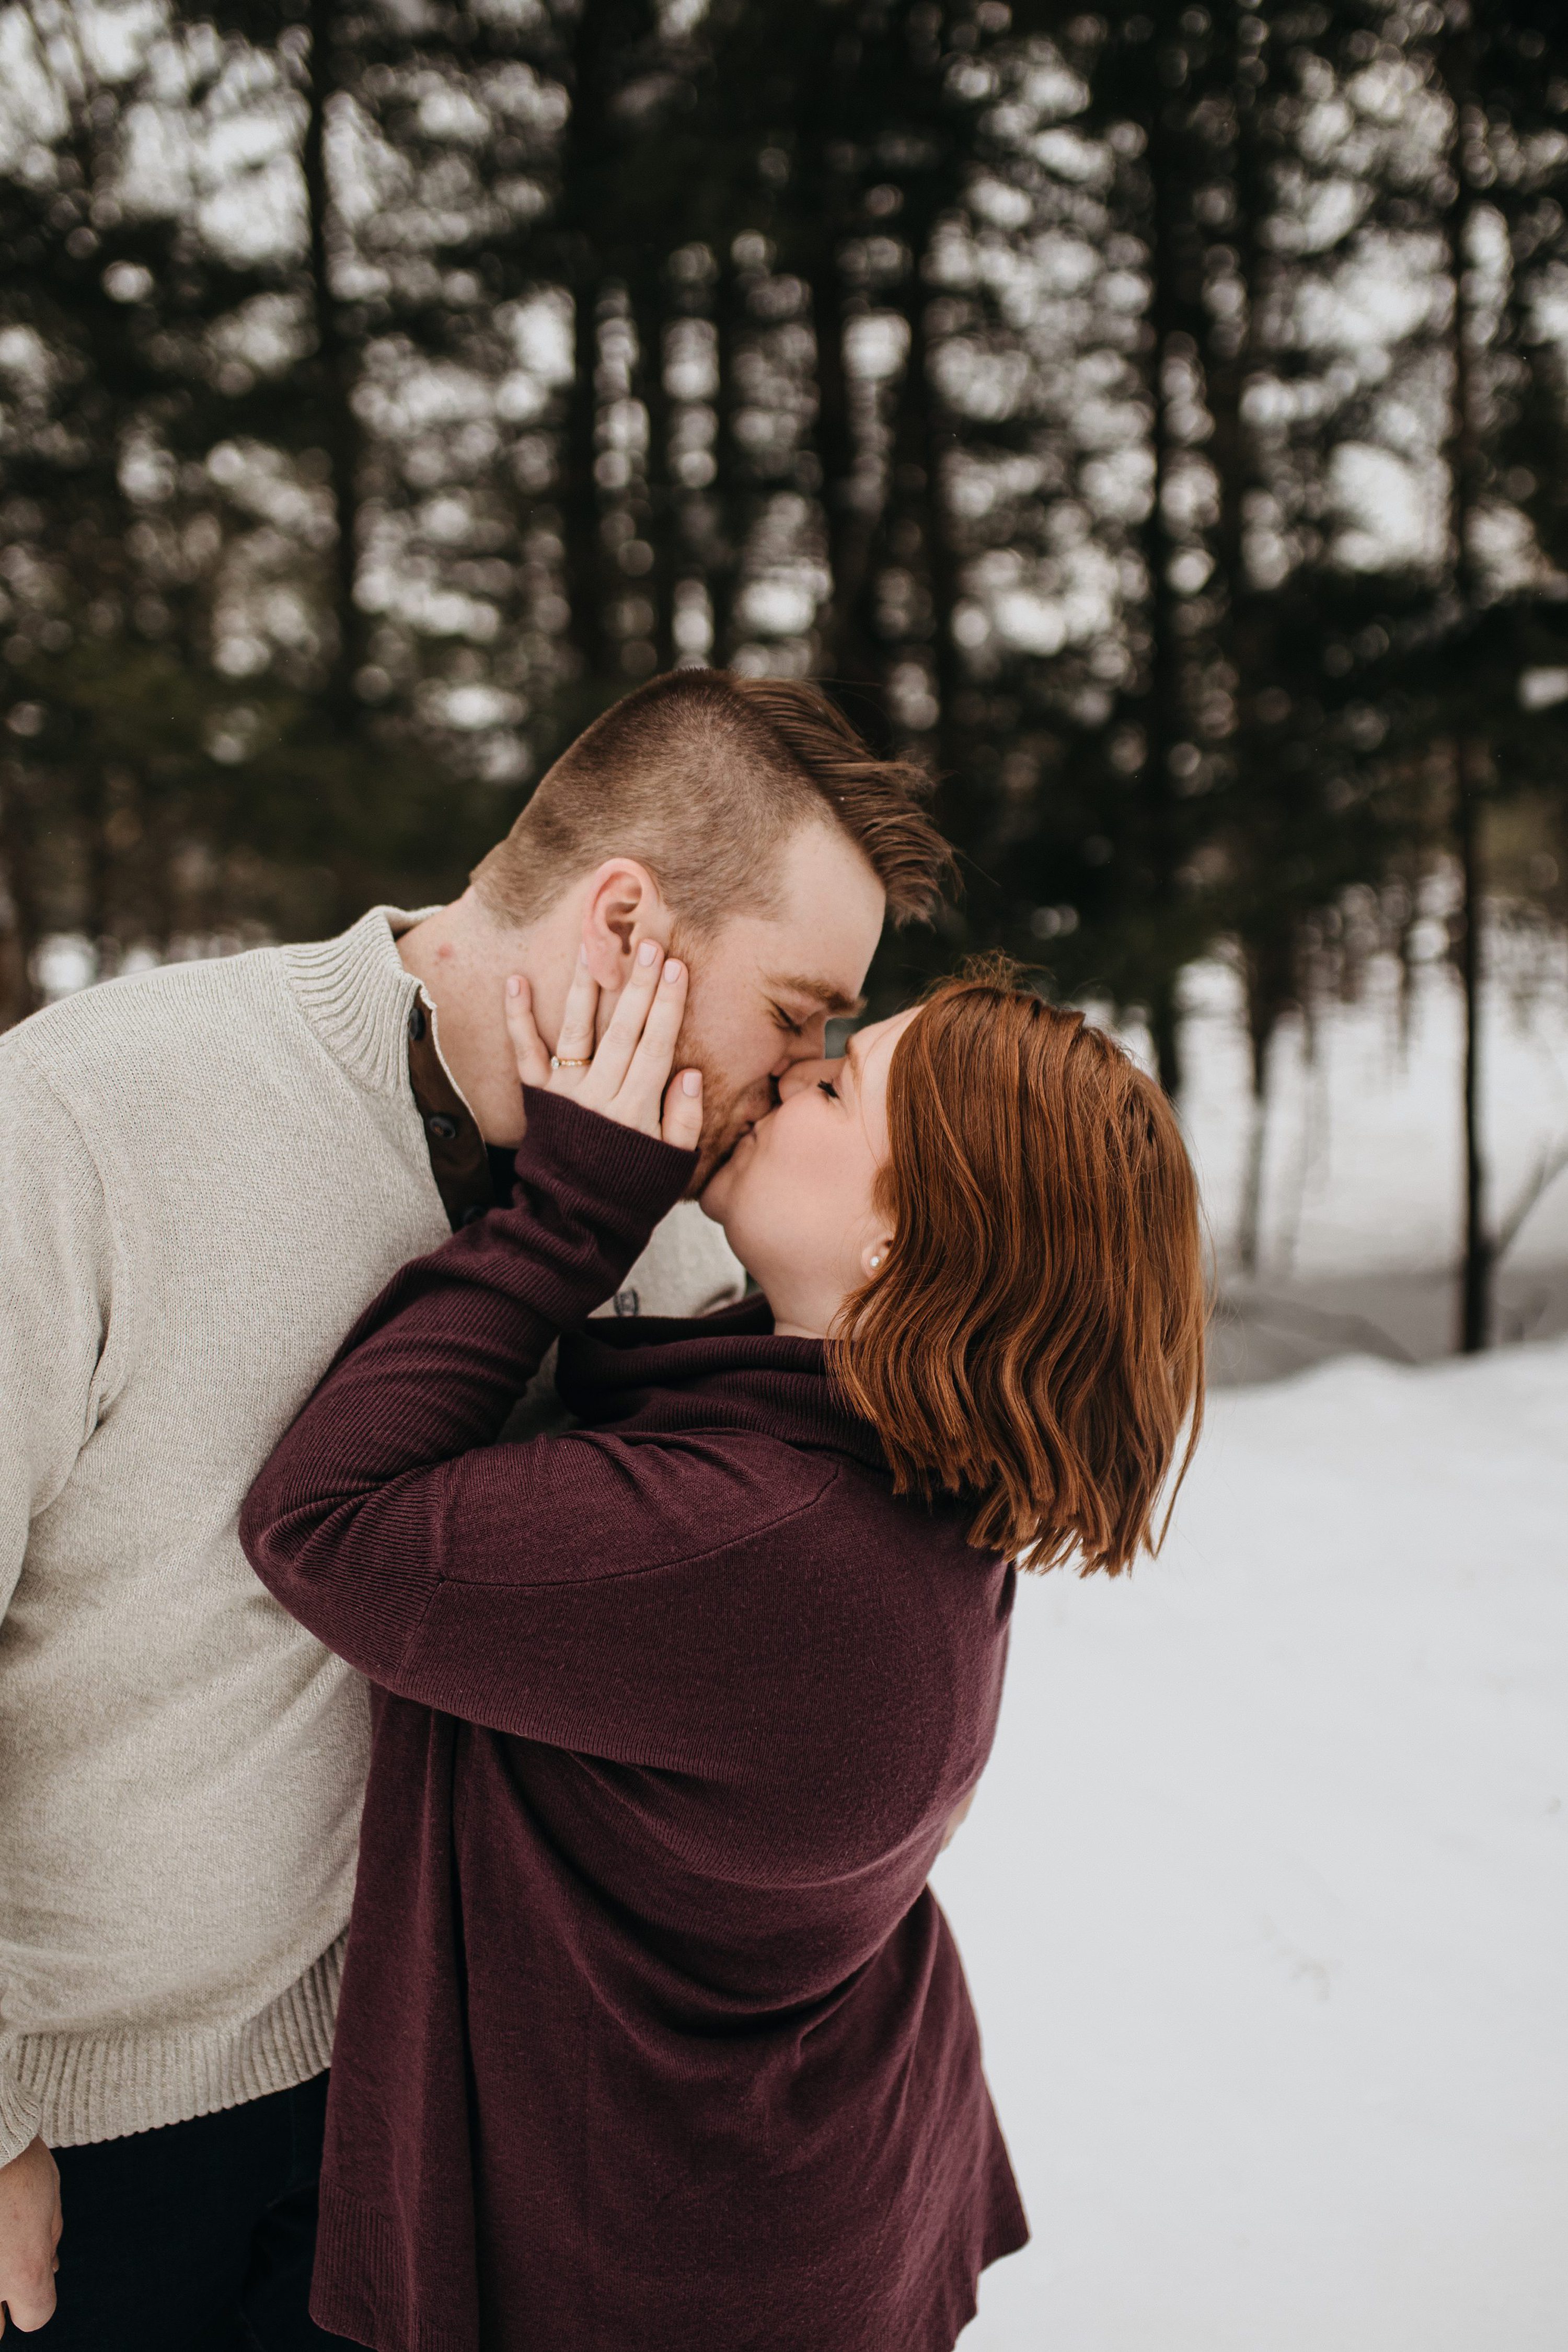 snowy outdoor engagement session,couples photos outdoor,cute couples photos,copper falls state park,copper falls state park engagement session,candid engagement session,winter couples photos,winter engagement session